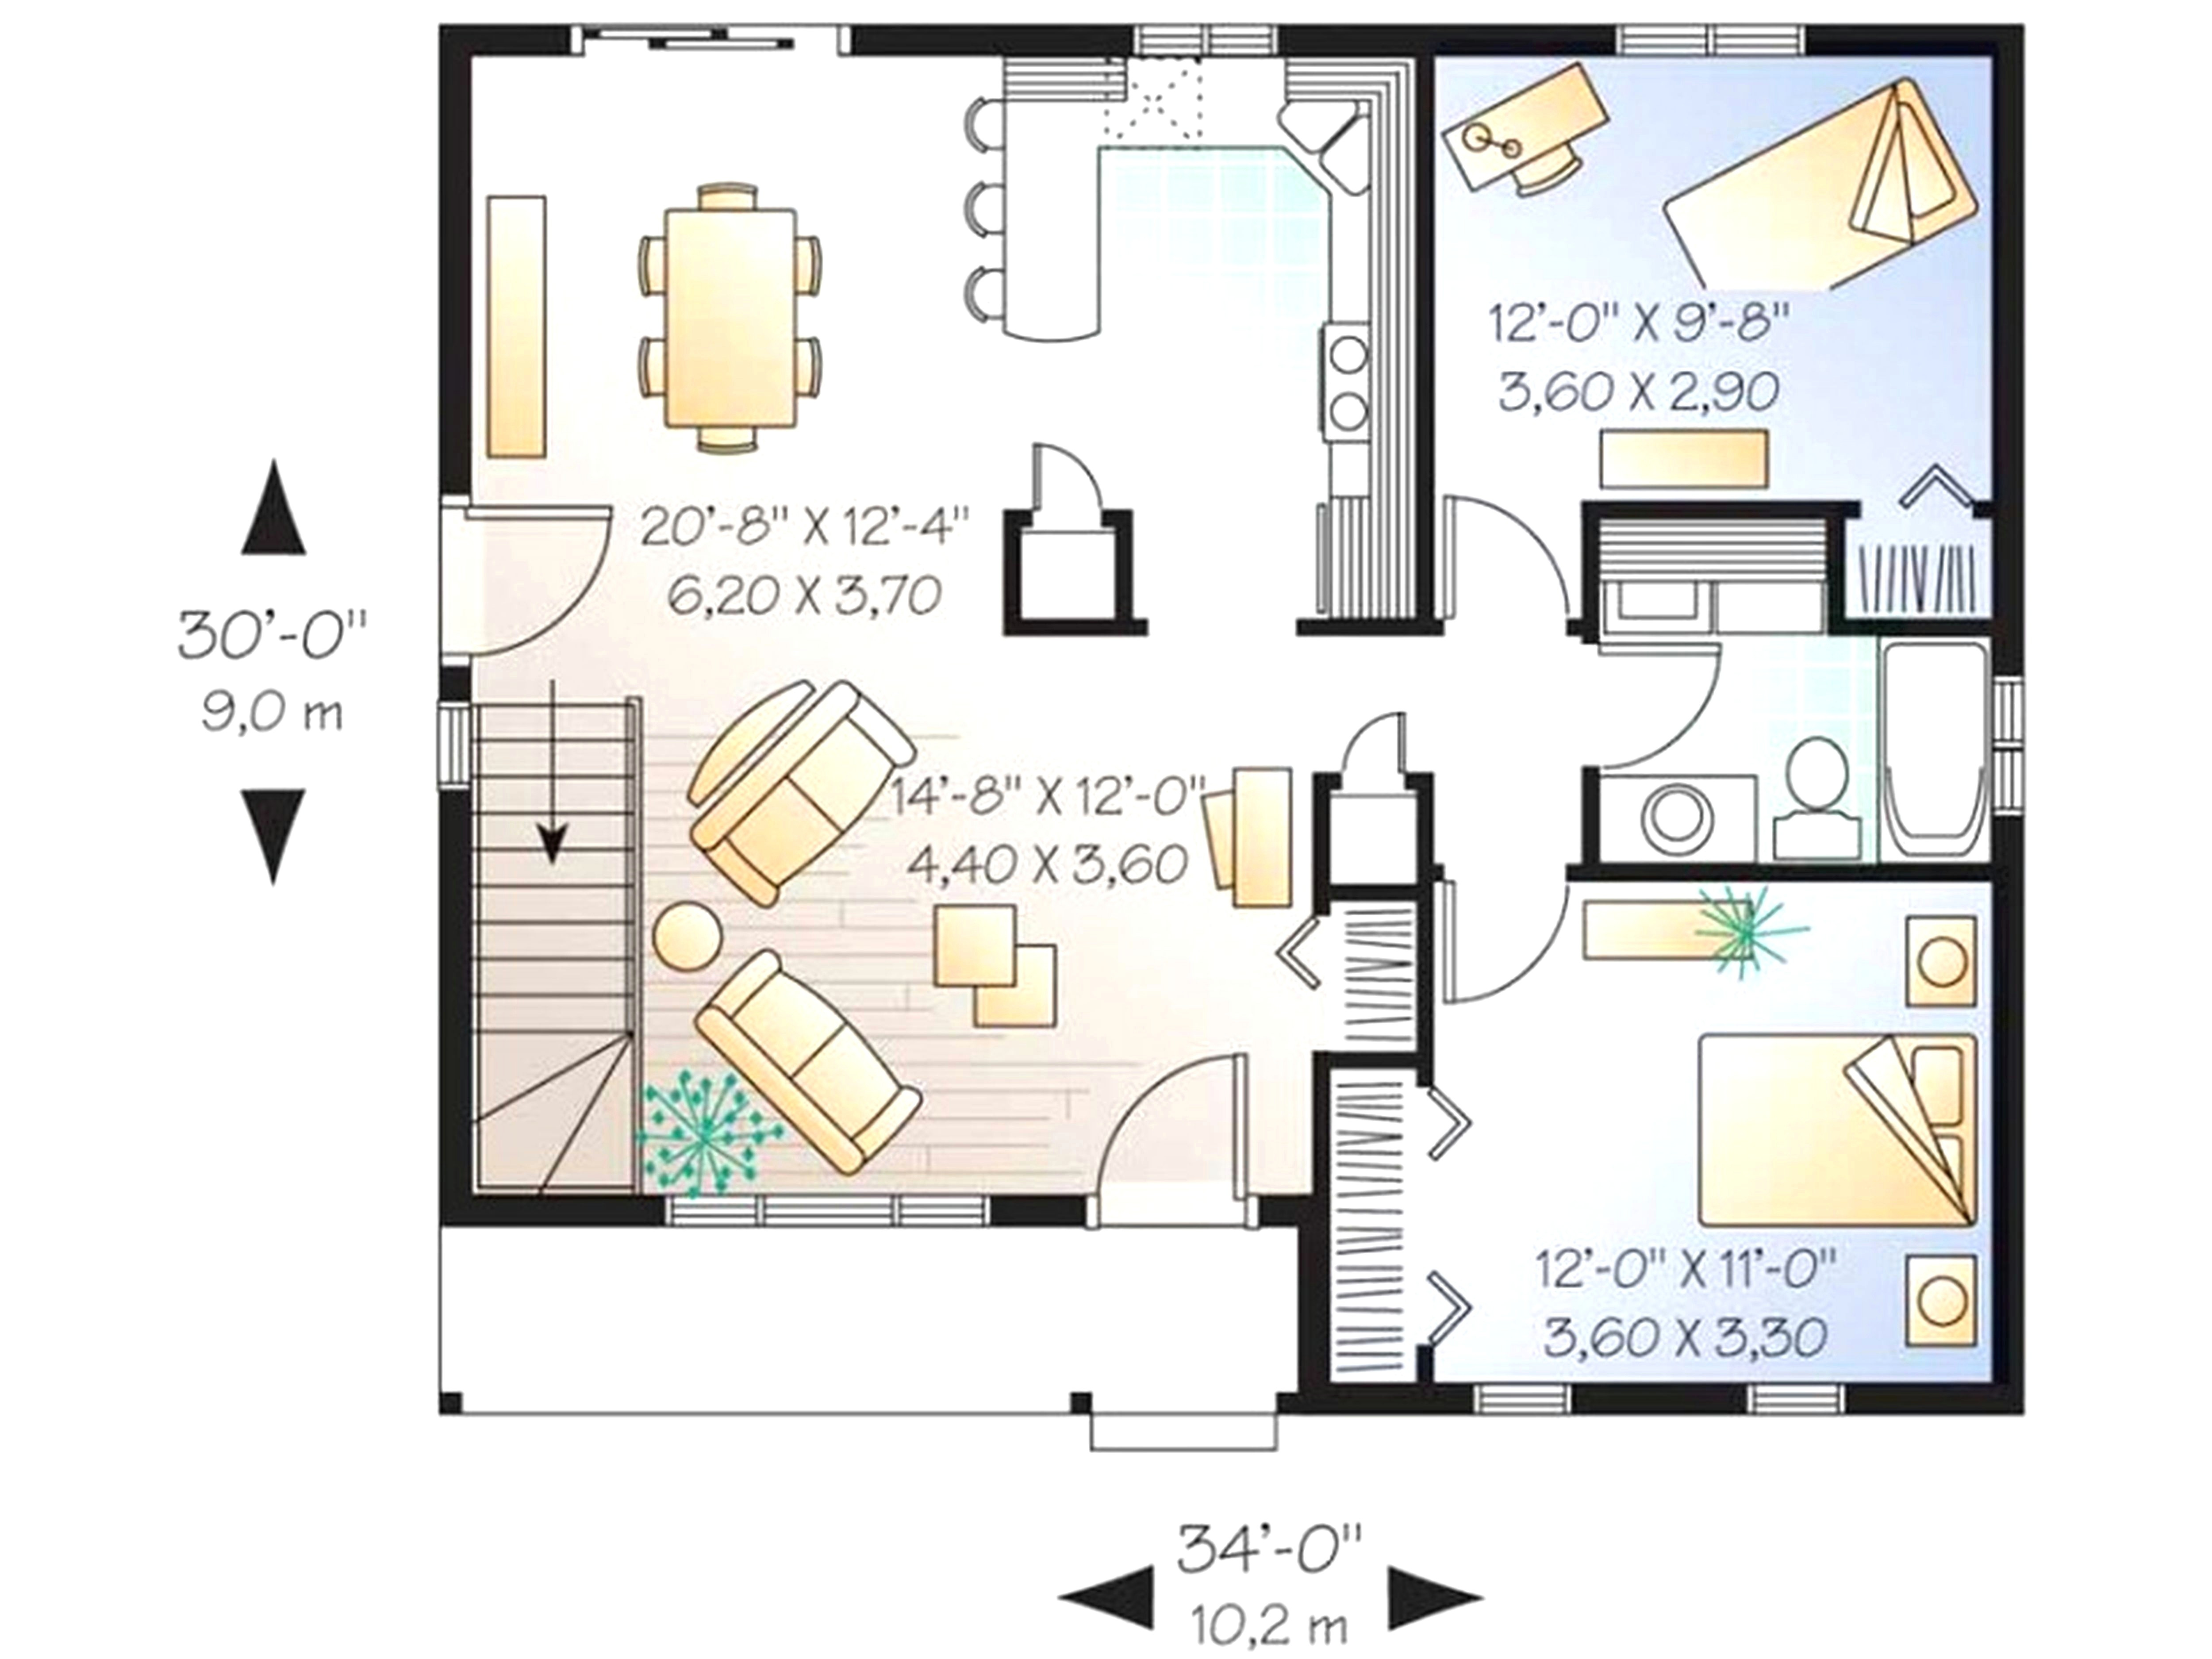 floor plan scale new how to draw a house plan to scale inspirational lumbec 0d archives